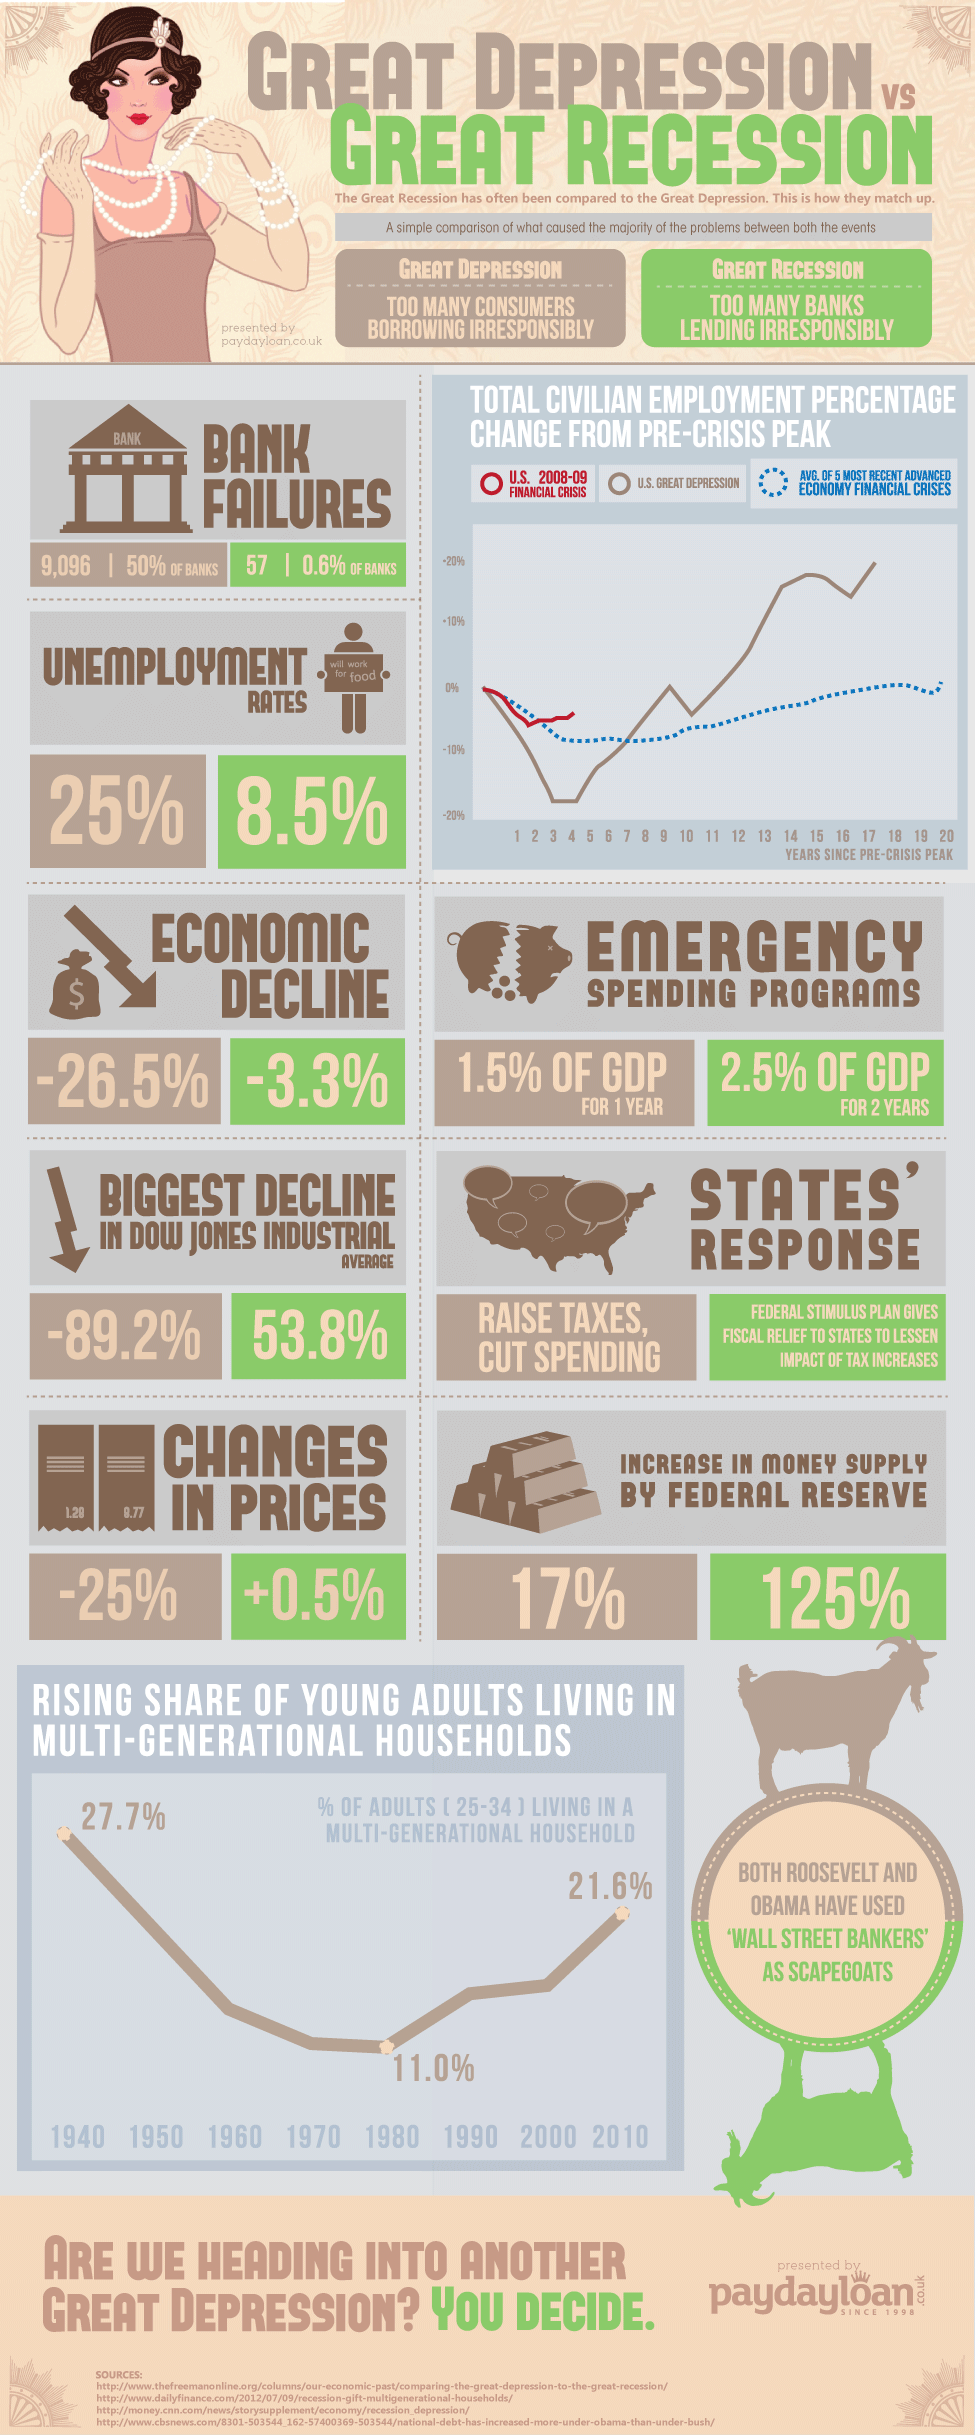 Great-Depression-Vs-Great-Recession-infographic